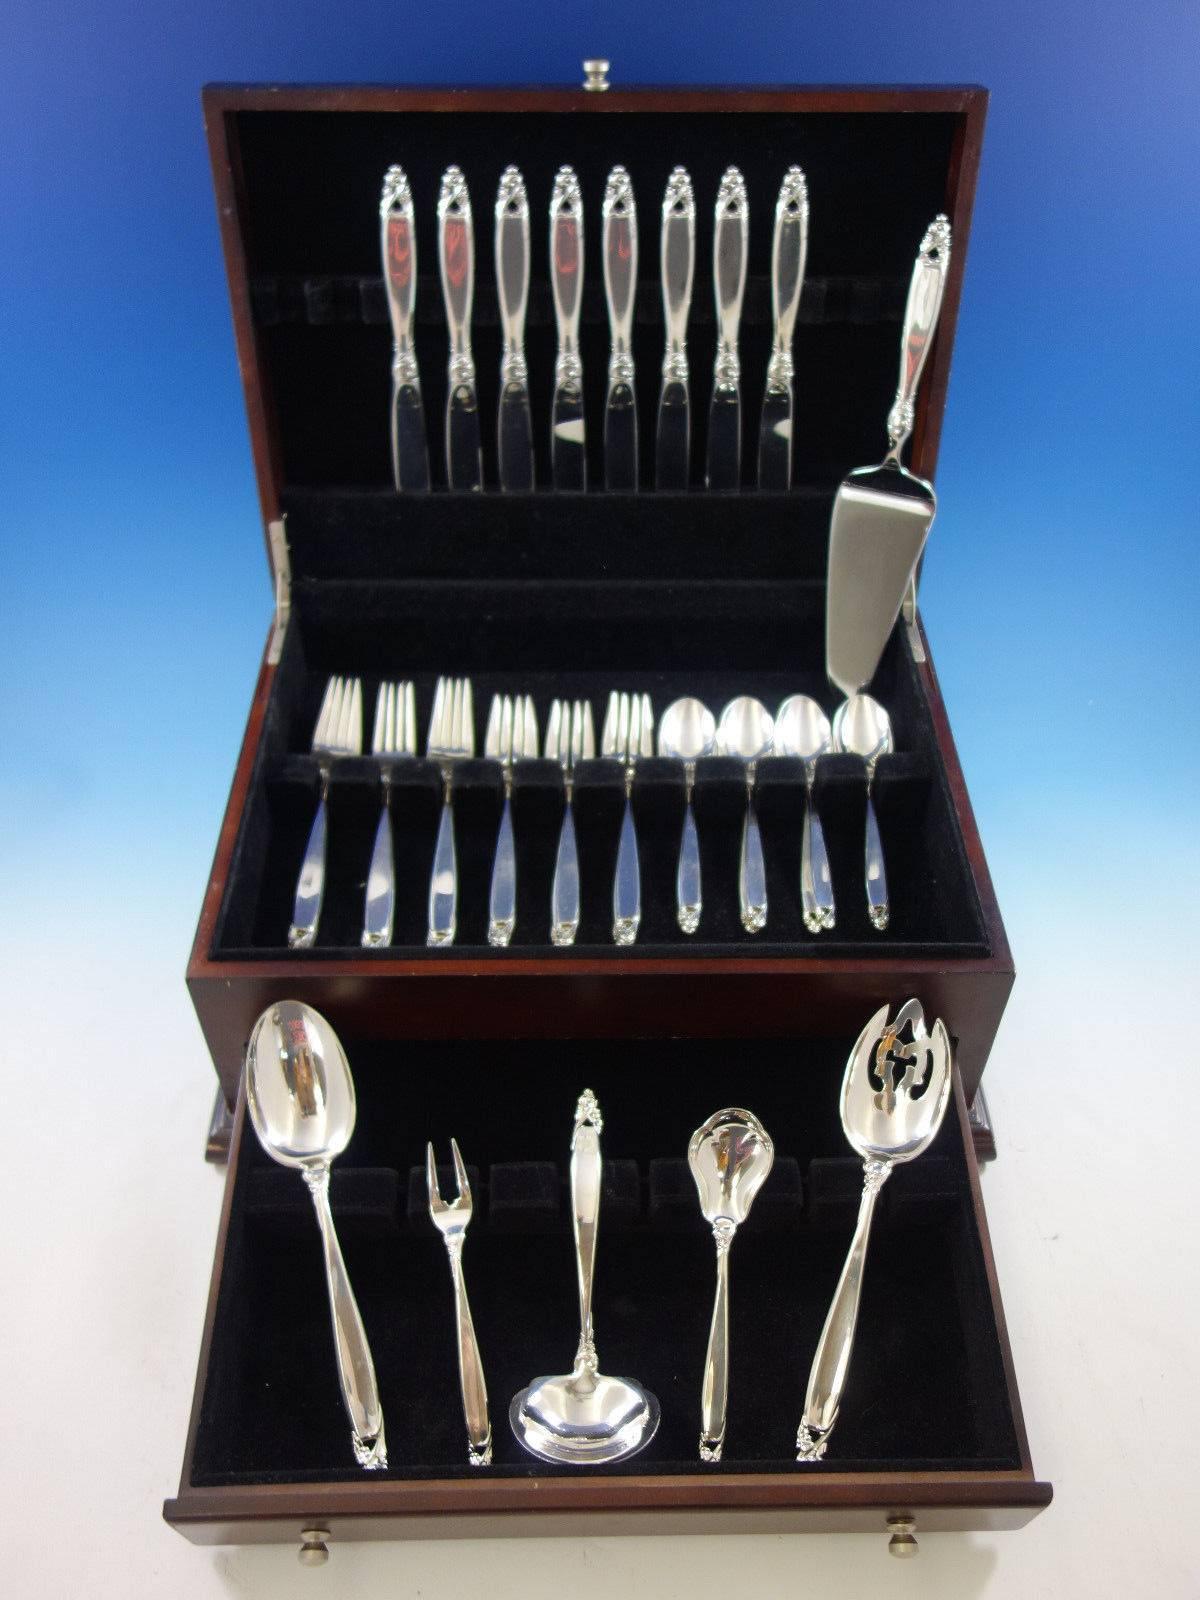 Counterpoint by Lunt sterling silver flatware set of 38 pieces. This set includes: 

Eight knives, 9